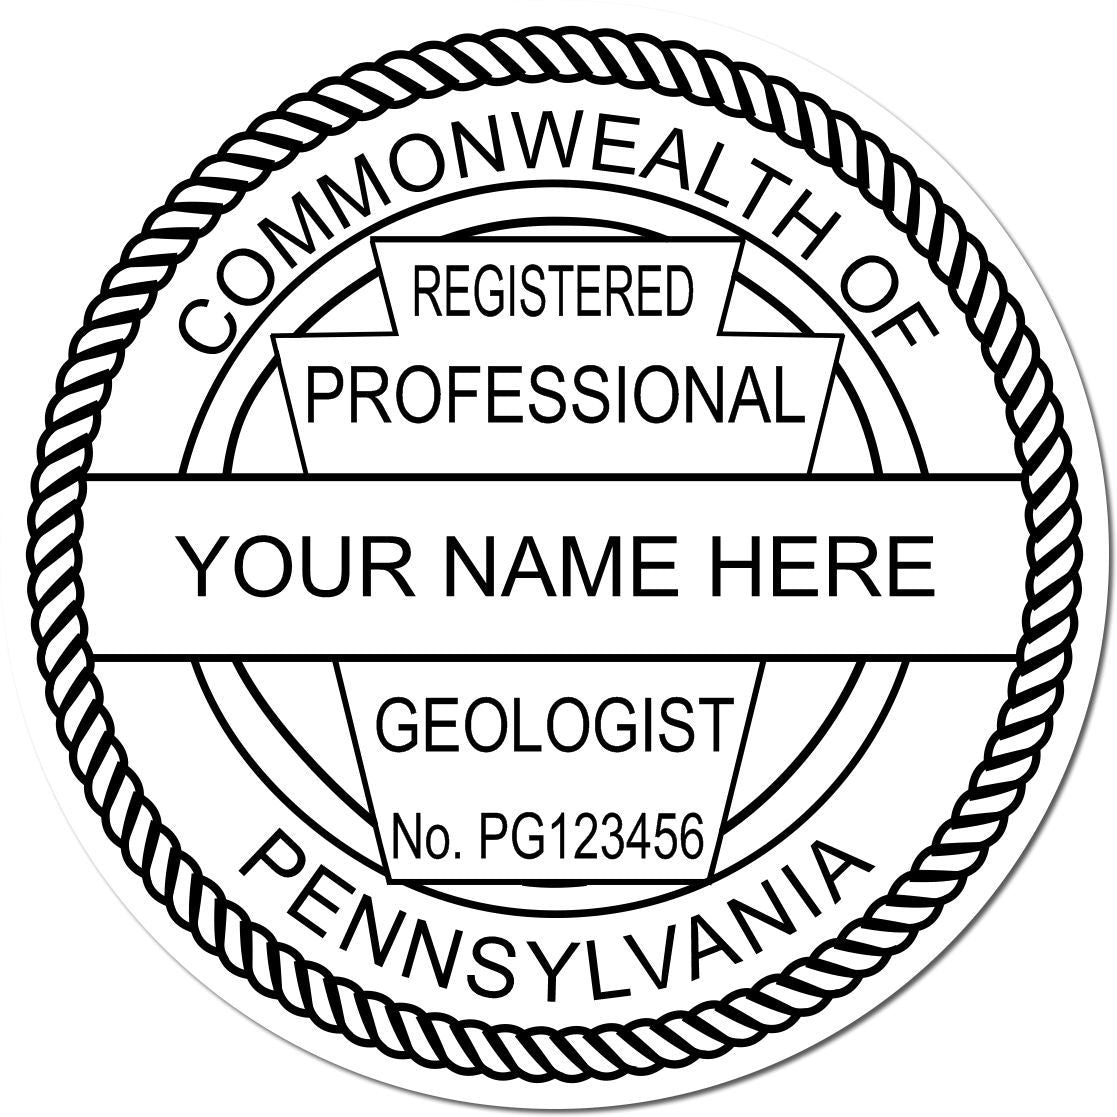 An alternative view of the Premium MaxLight Pre-Inked Pennsylvania Geology Stamp stamped on a sheet of paper showing the image in use